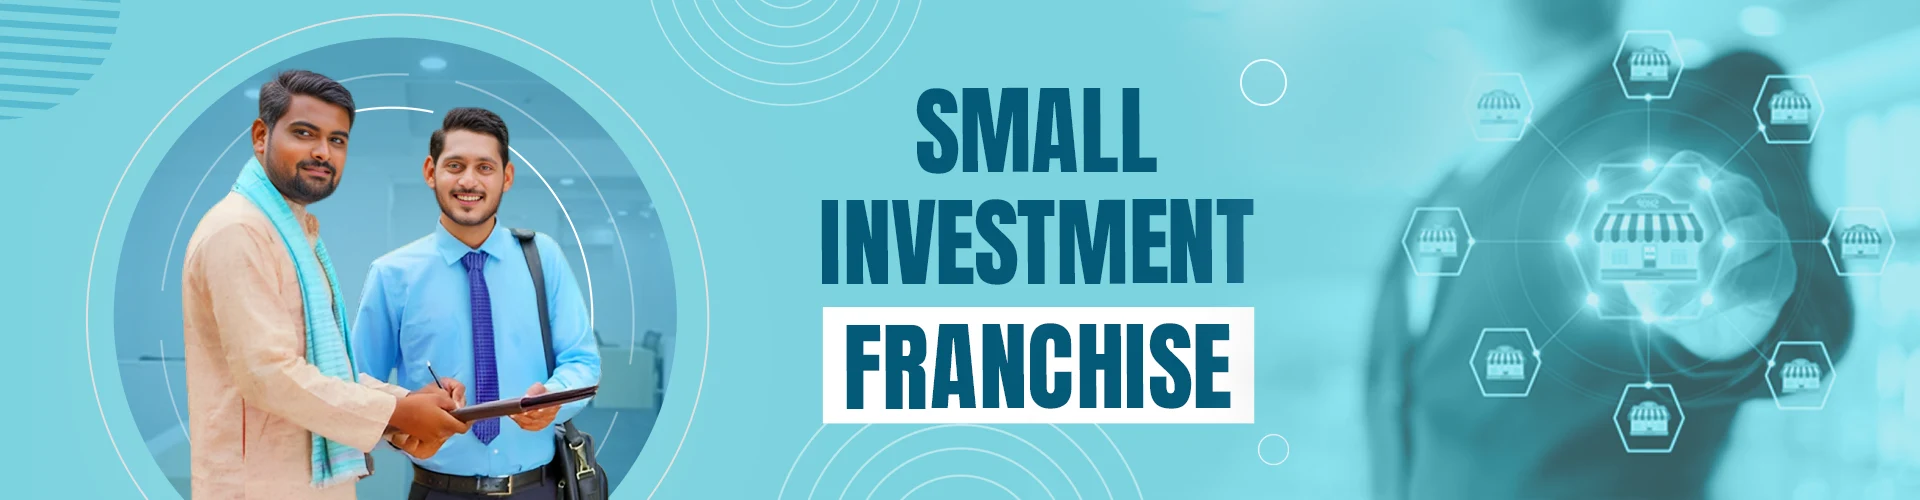 Small Investment Franchise Businesses